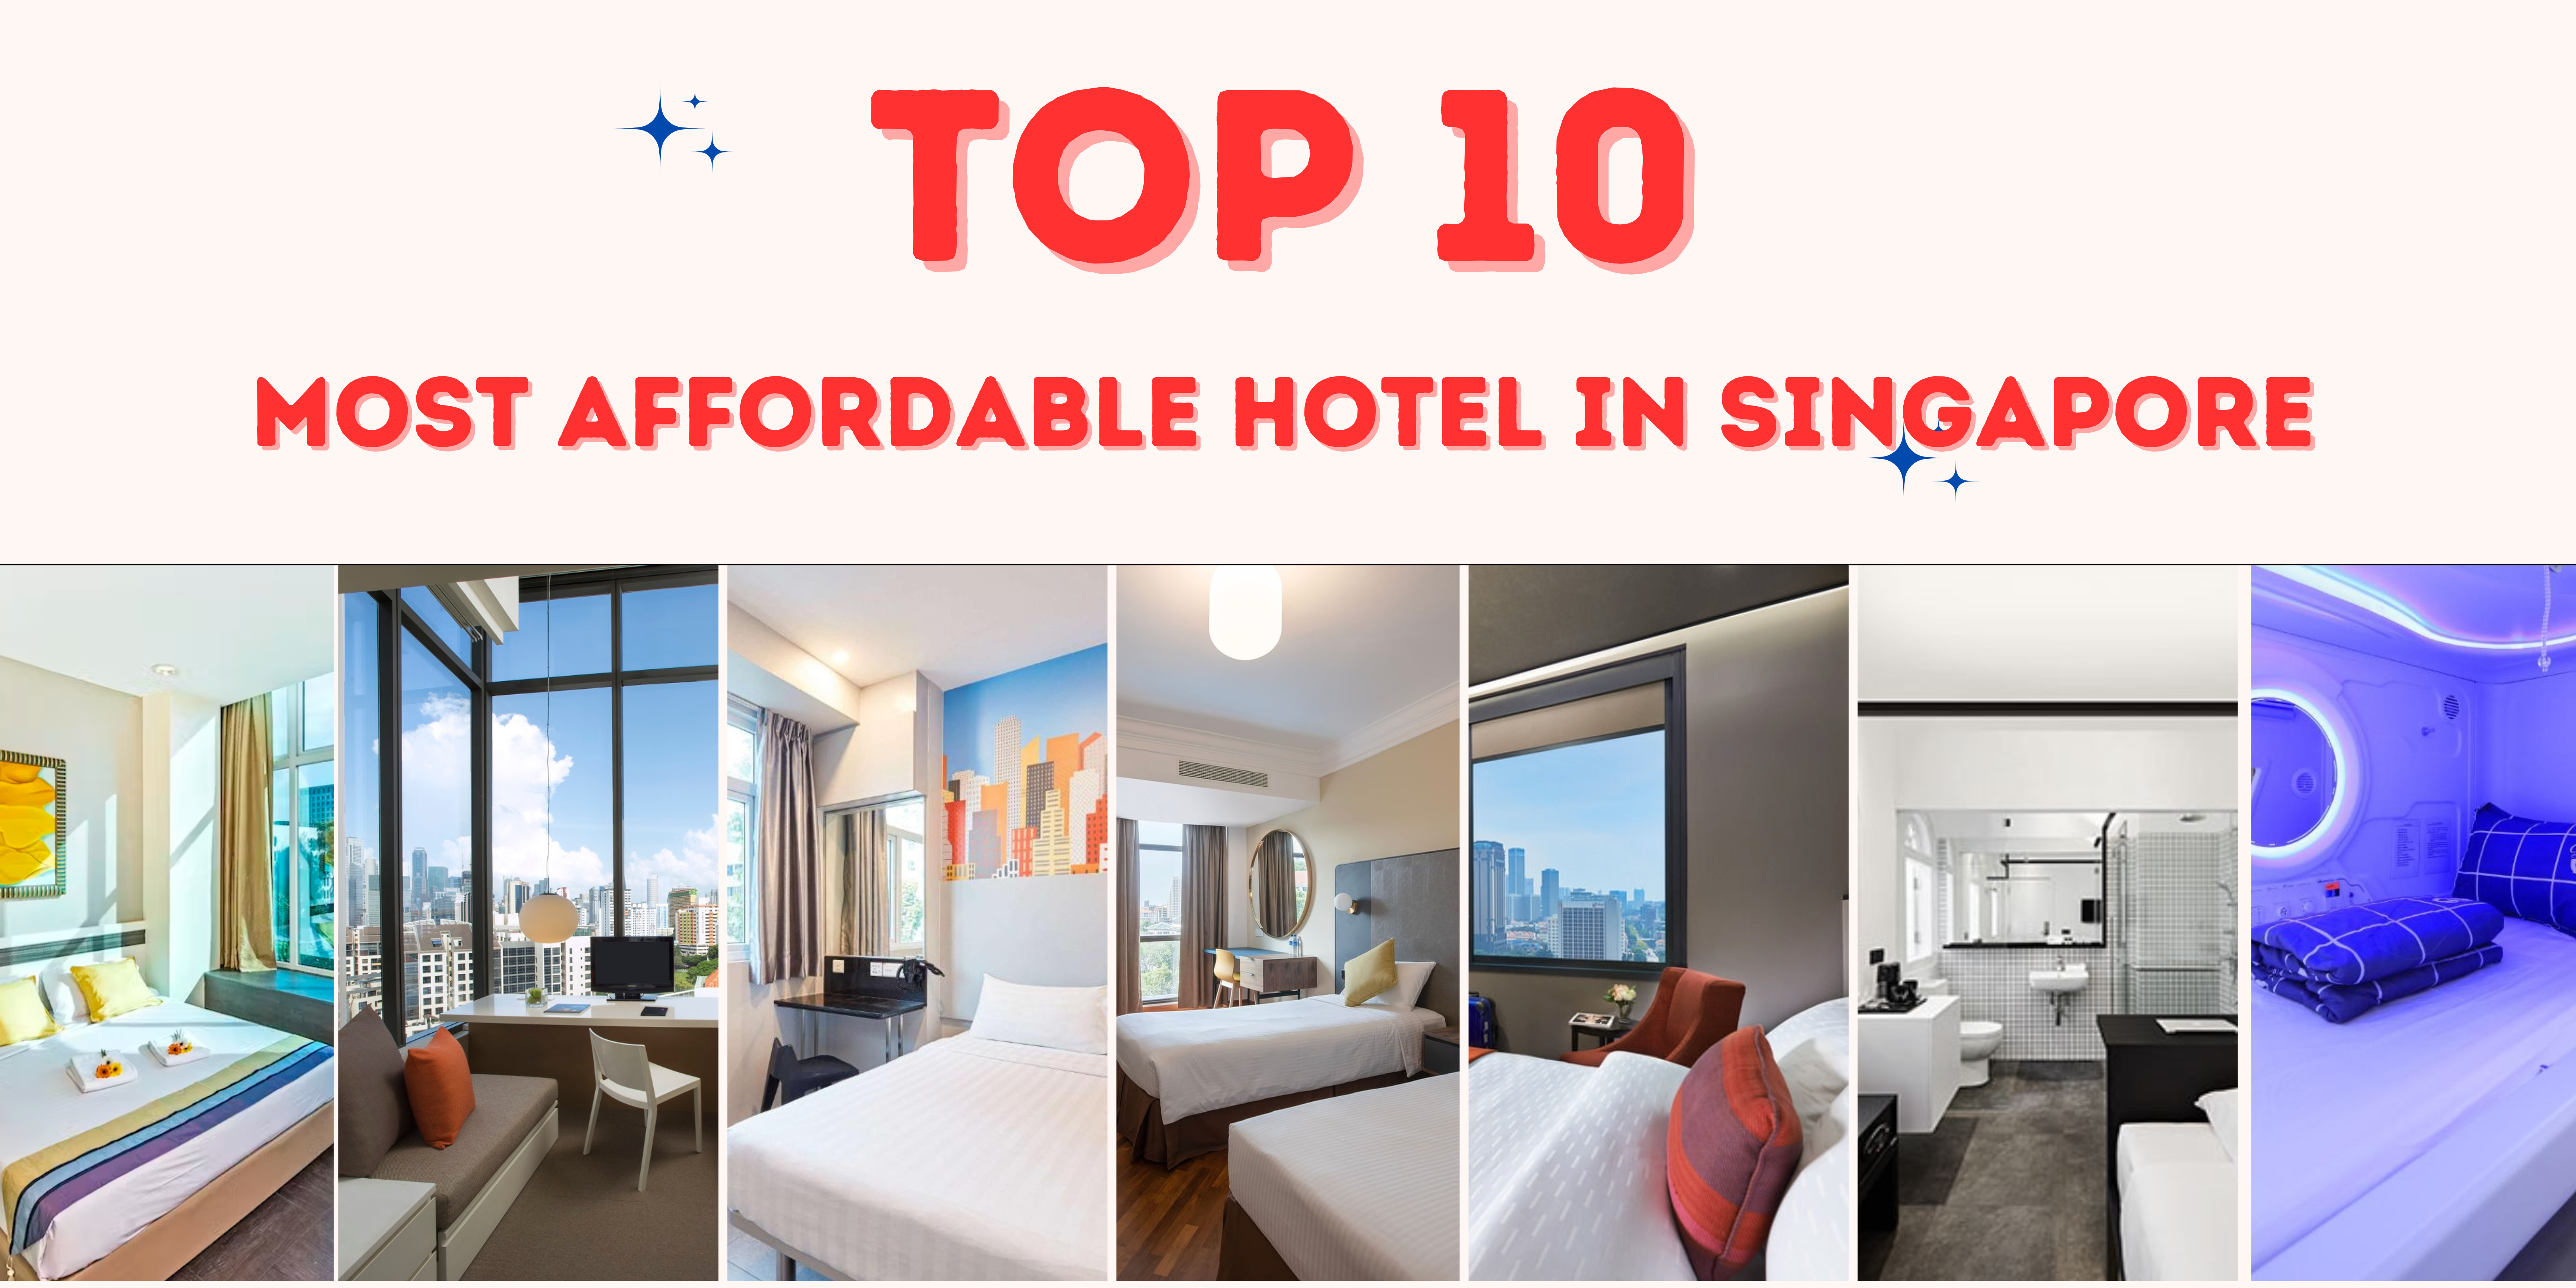 TOP 10 Most Affordable Hotel in Singapore